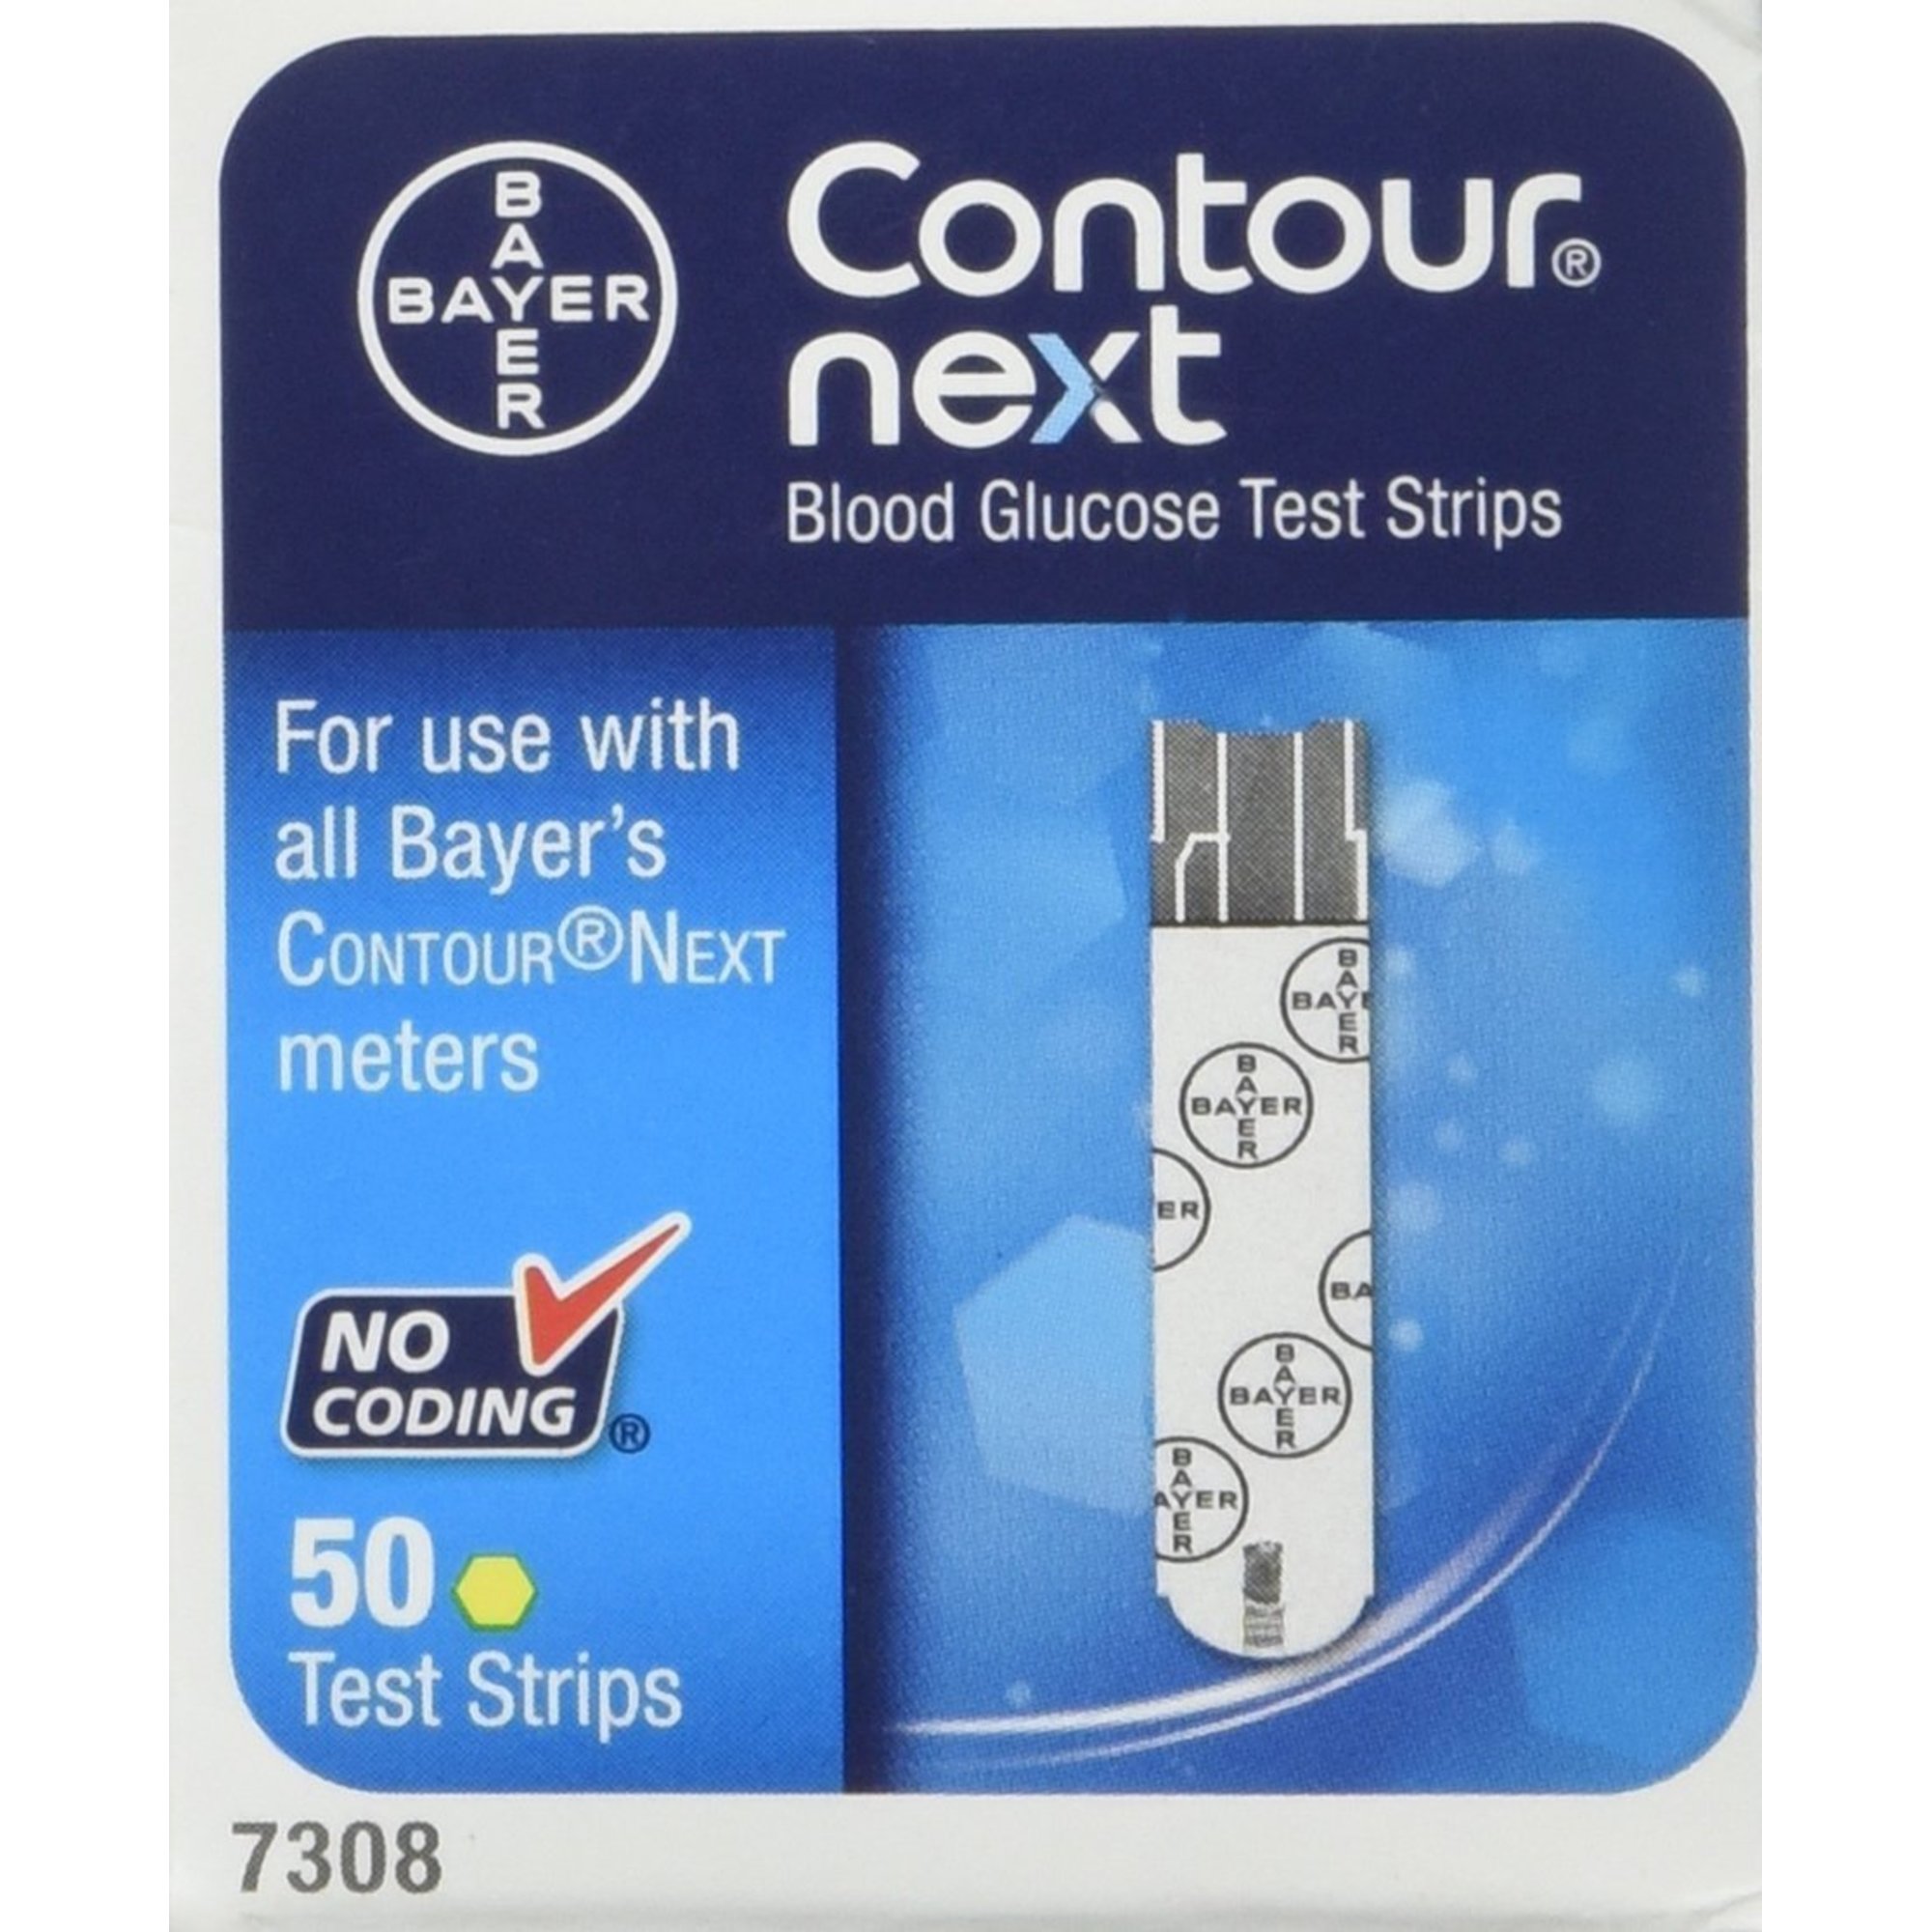 Bayer Contour NEXT Blood Glucose Test Strips, 50 Ct - image 4 of 5